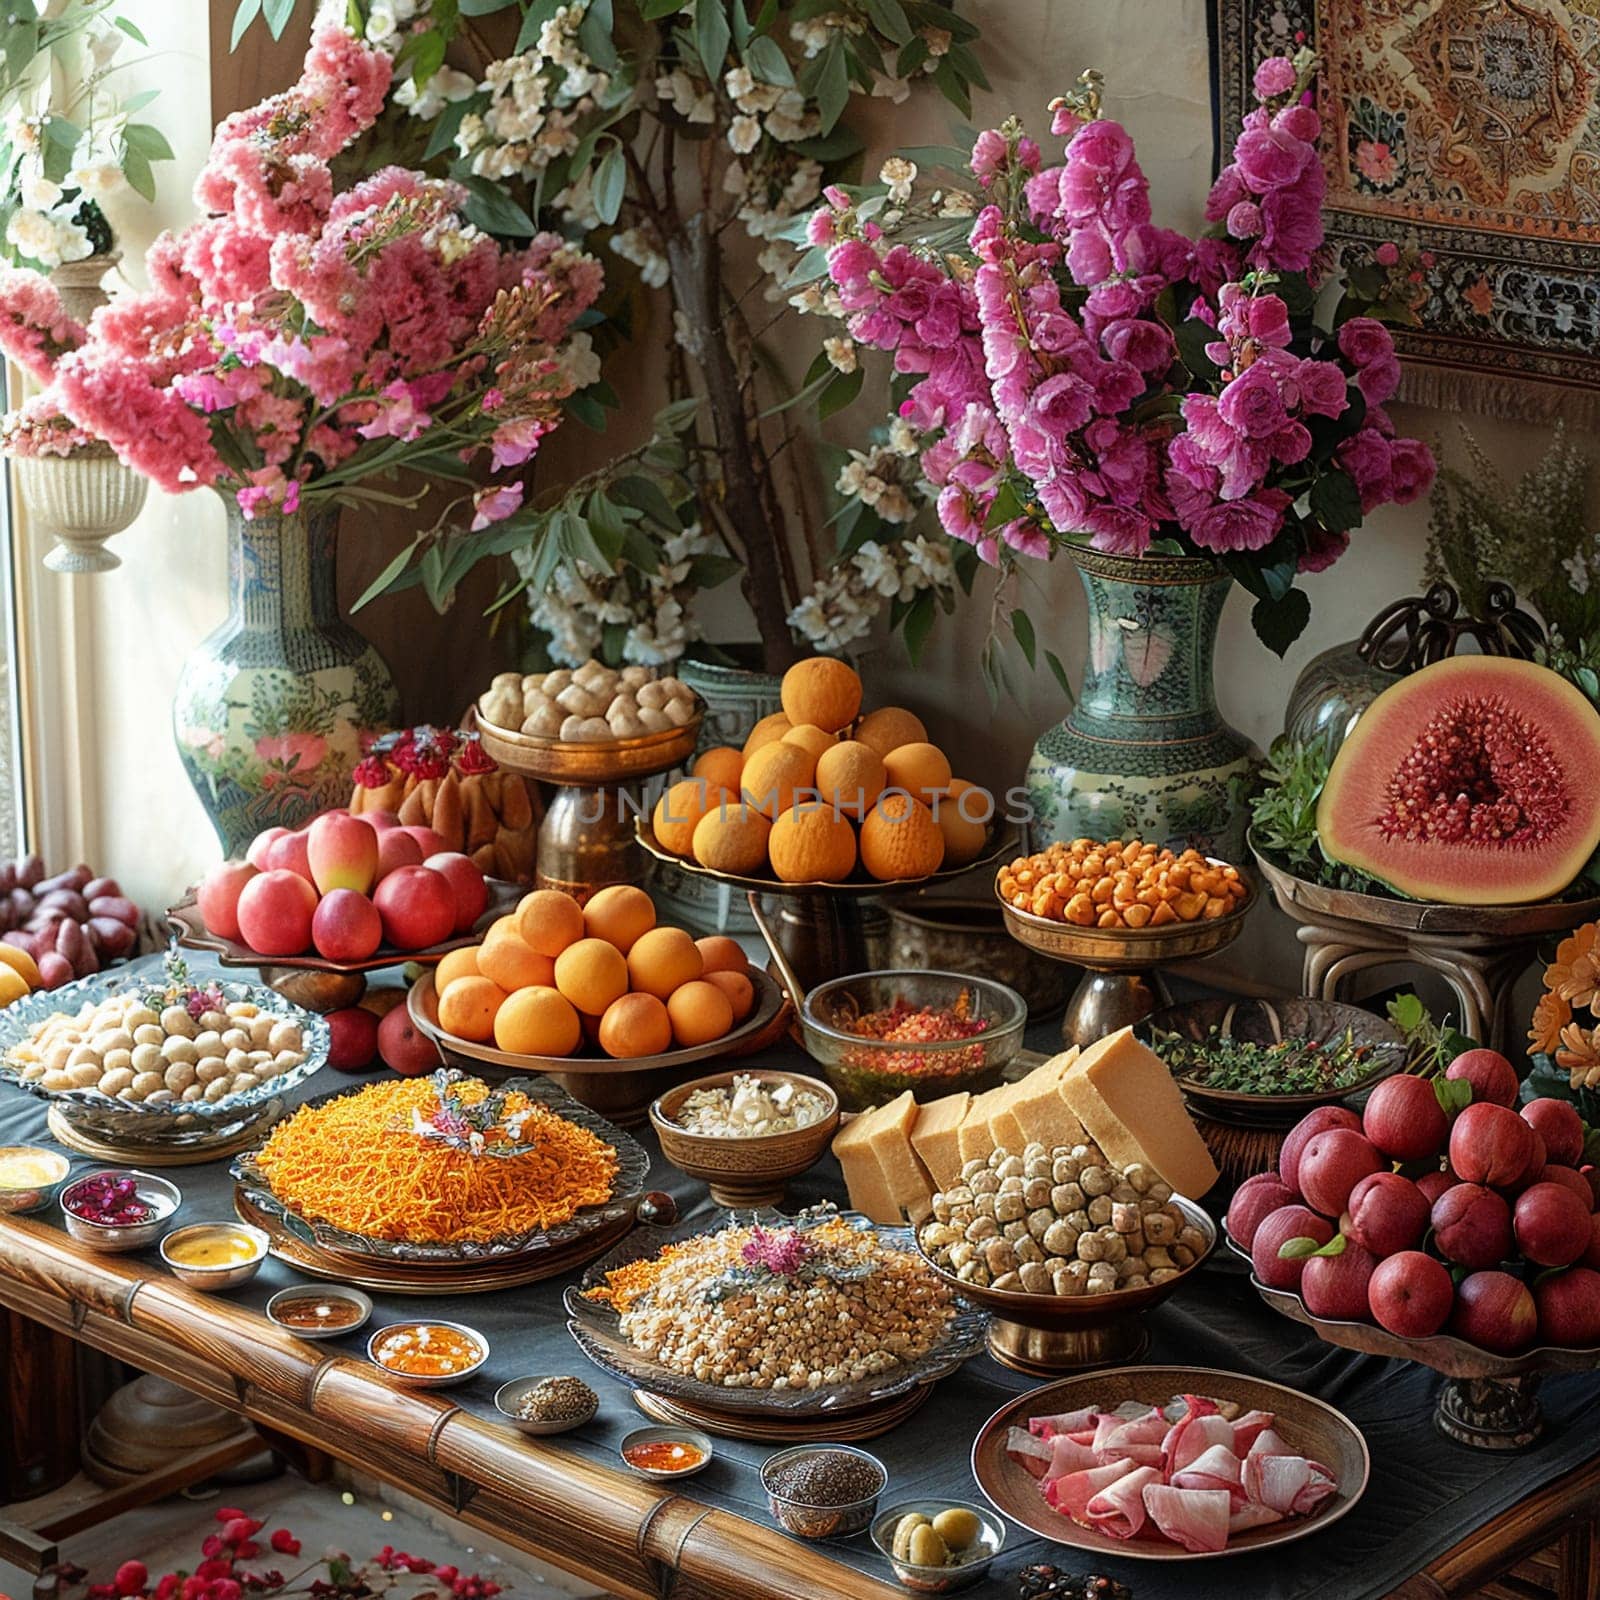 Meticulously arranged Nowruz haft-seen table, complete with all seven items.